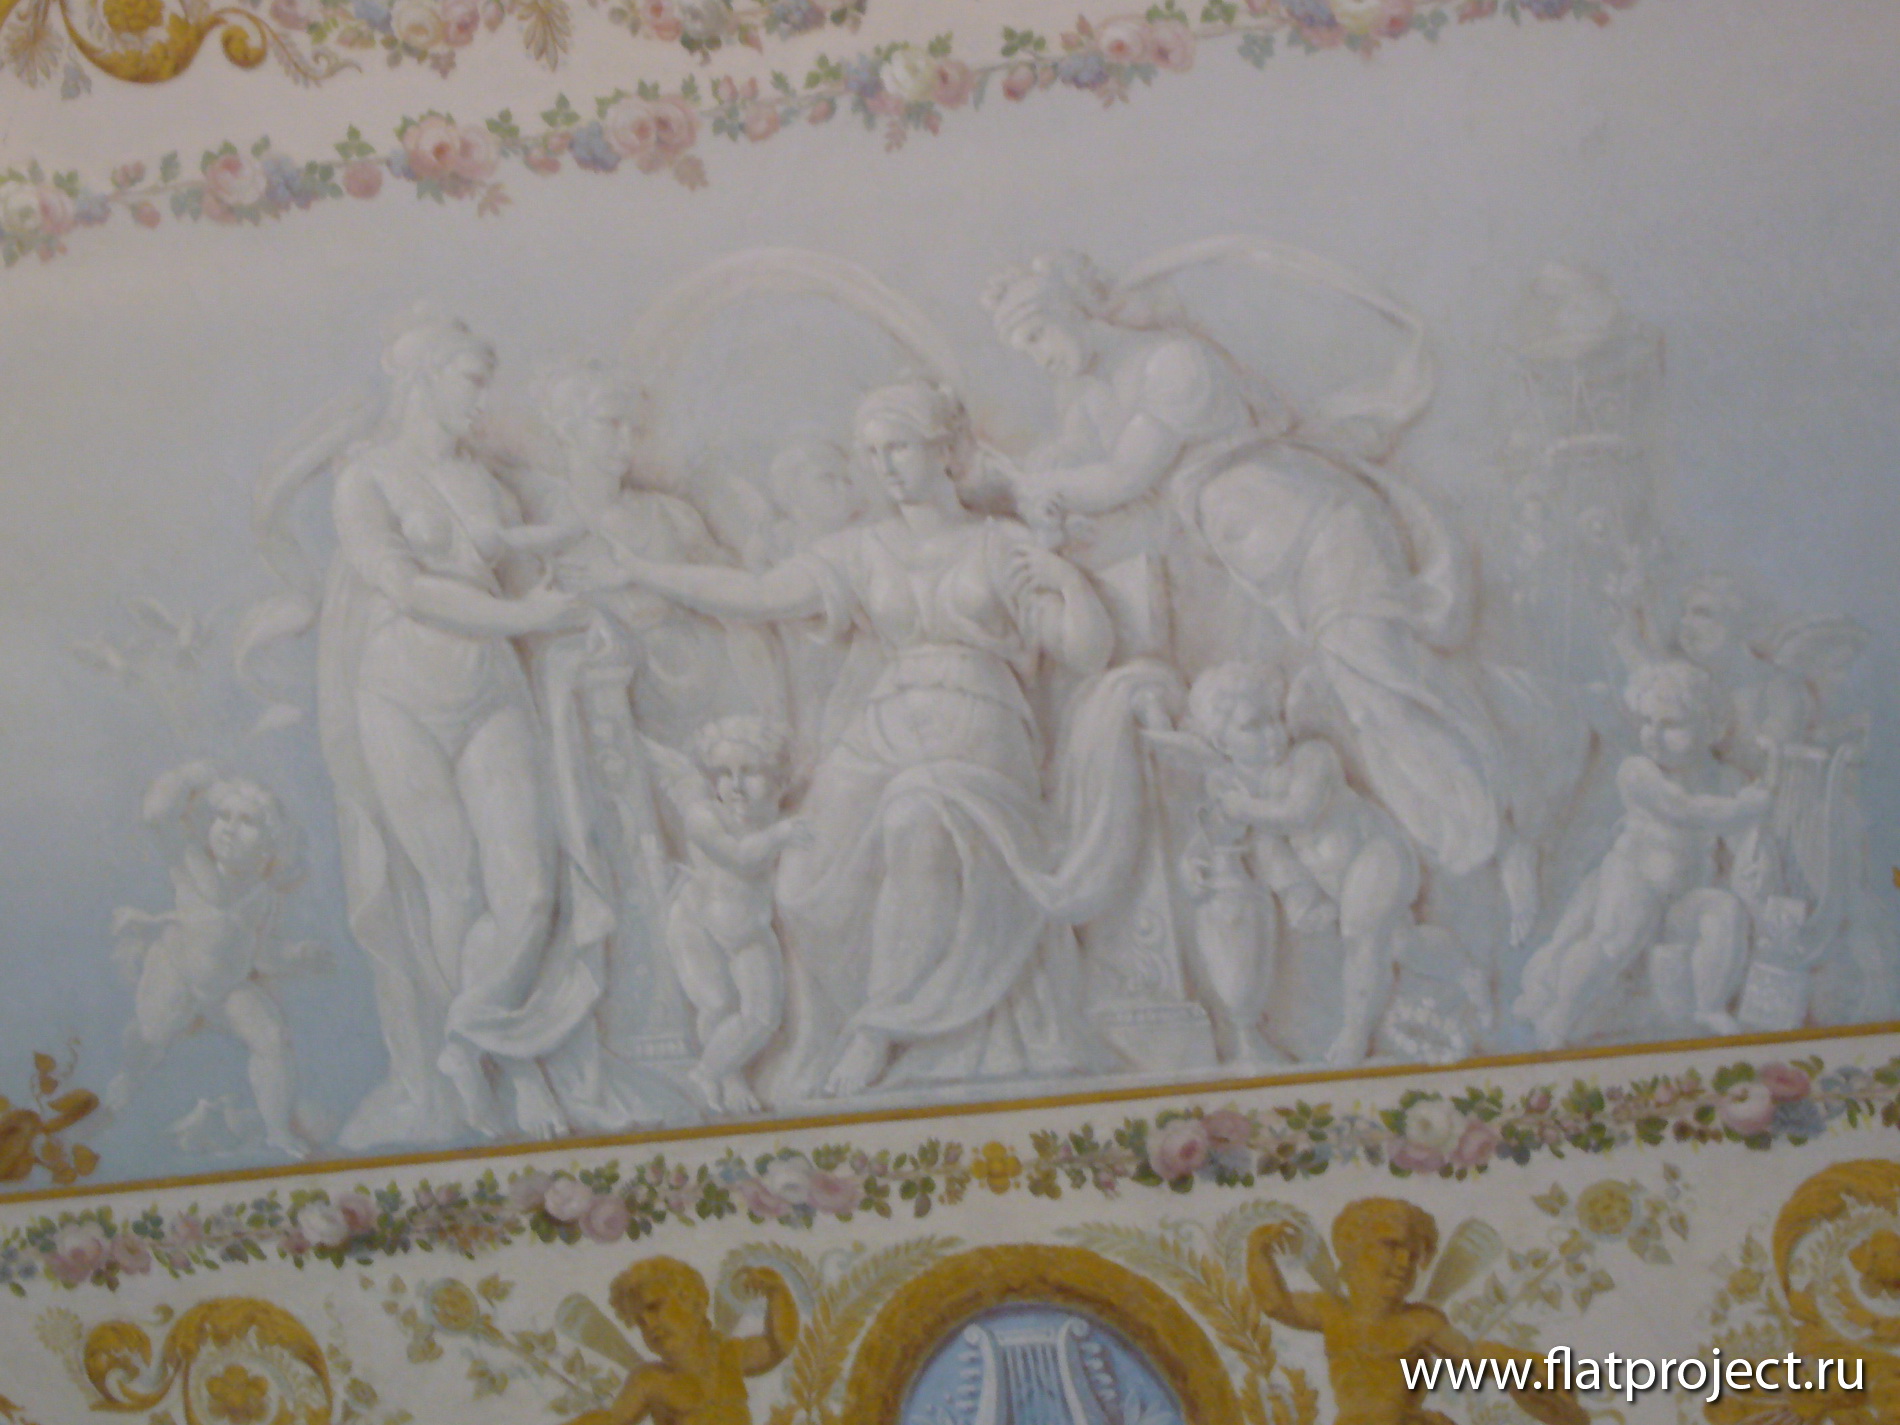 The State Russian museum interiors – photo 70